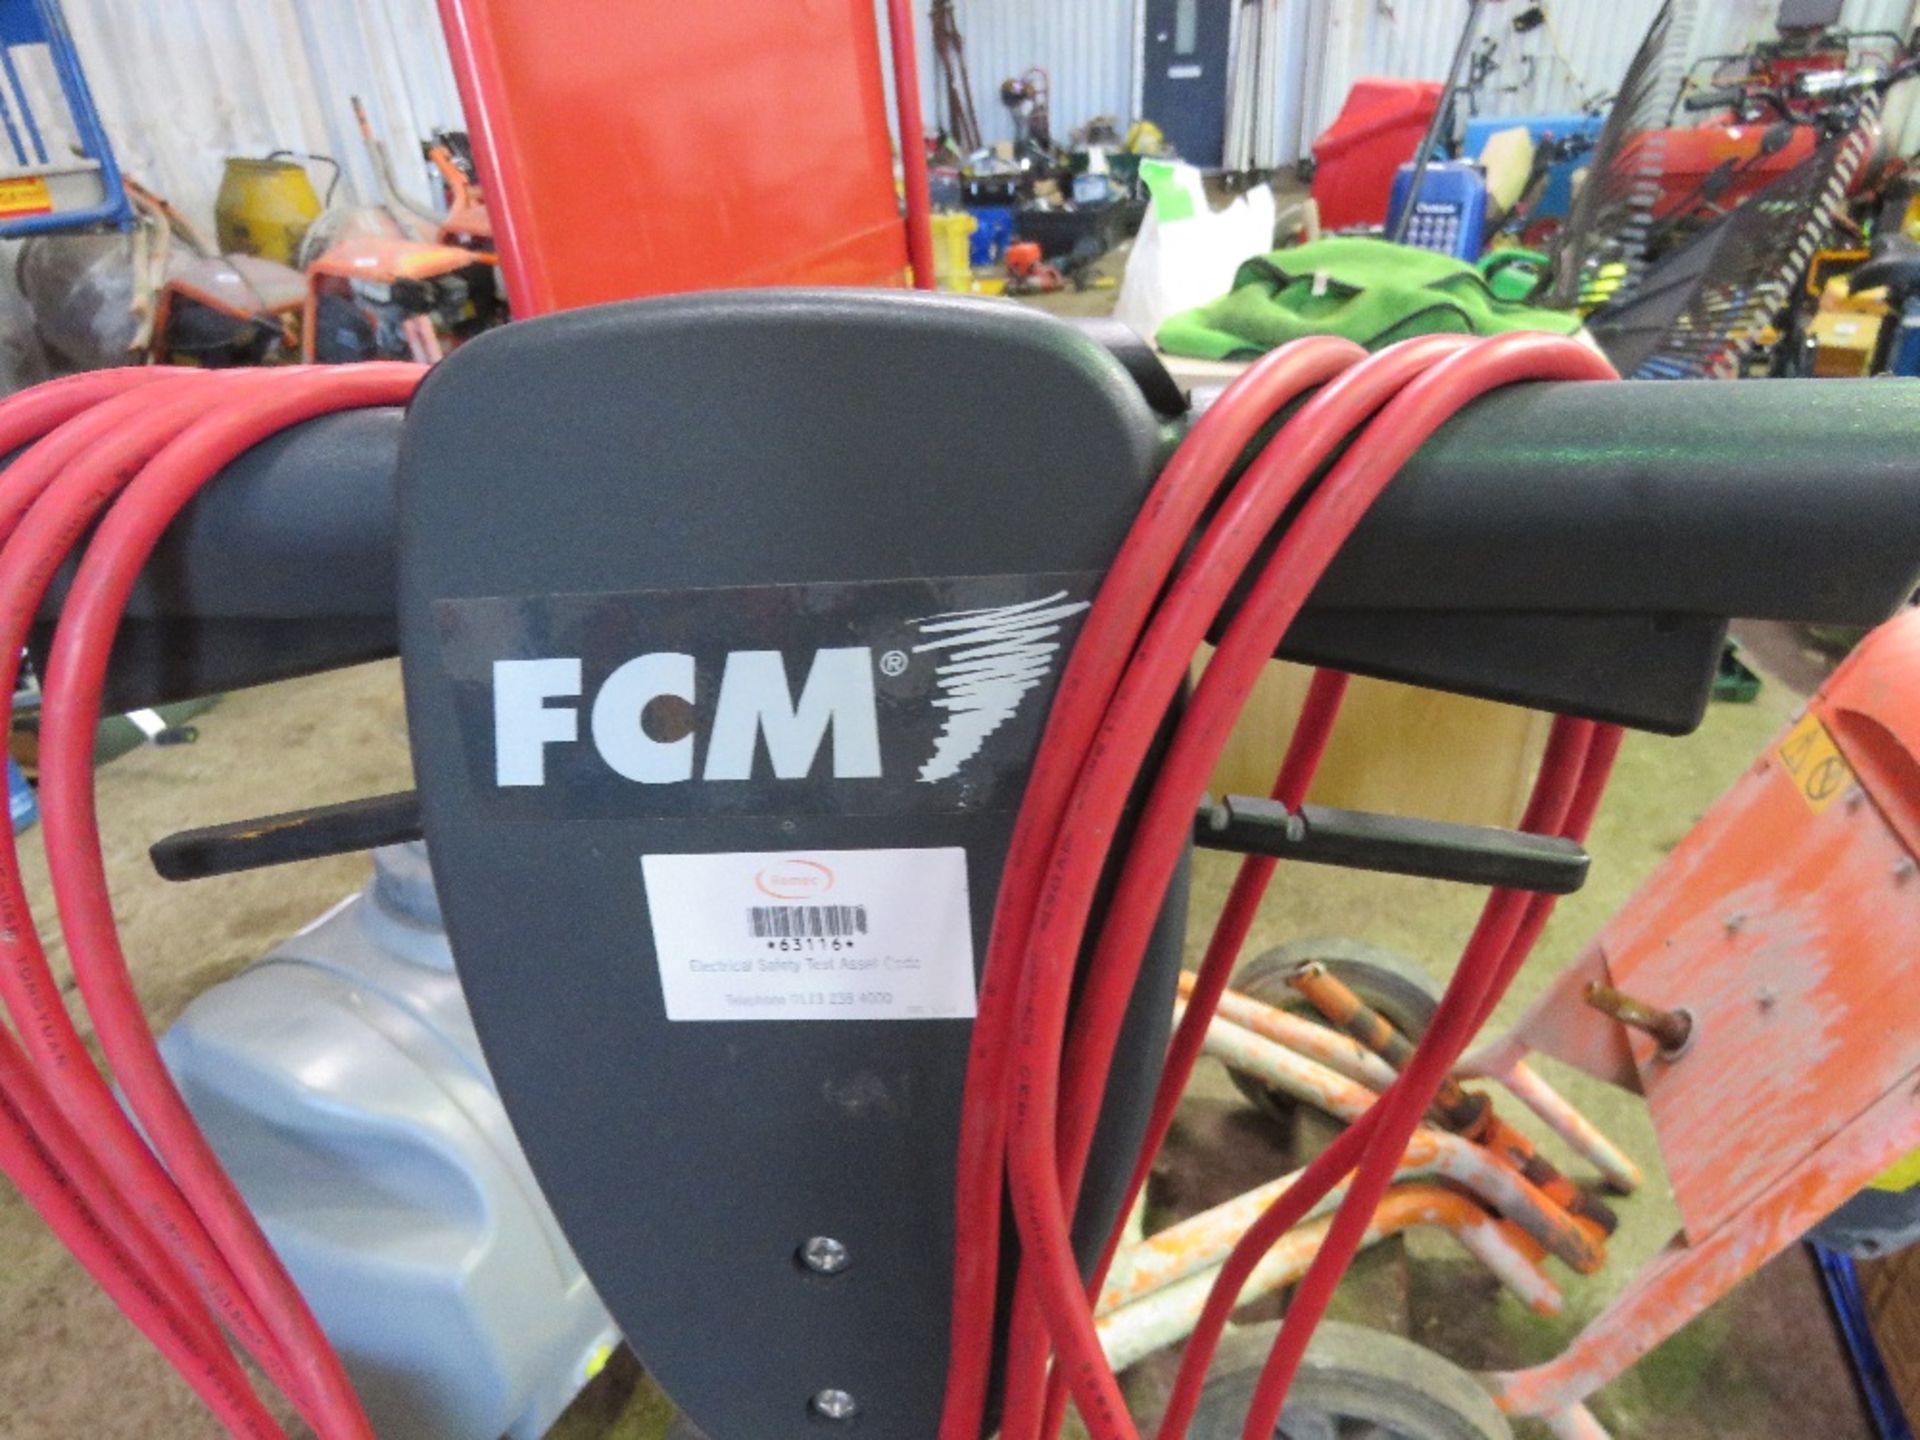 FCM200 FLOOR SCRUBBER UNIT WITH HEADS, 240VOLT POWERED. THIS LOT IS SOLD UNDER THE AUCTIONEERS MA - Image 4 of 6